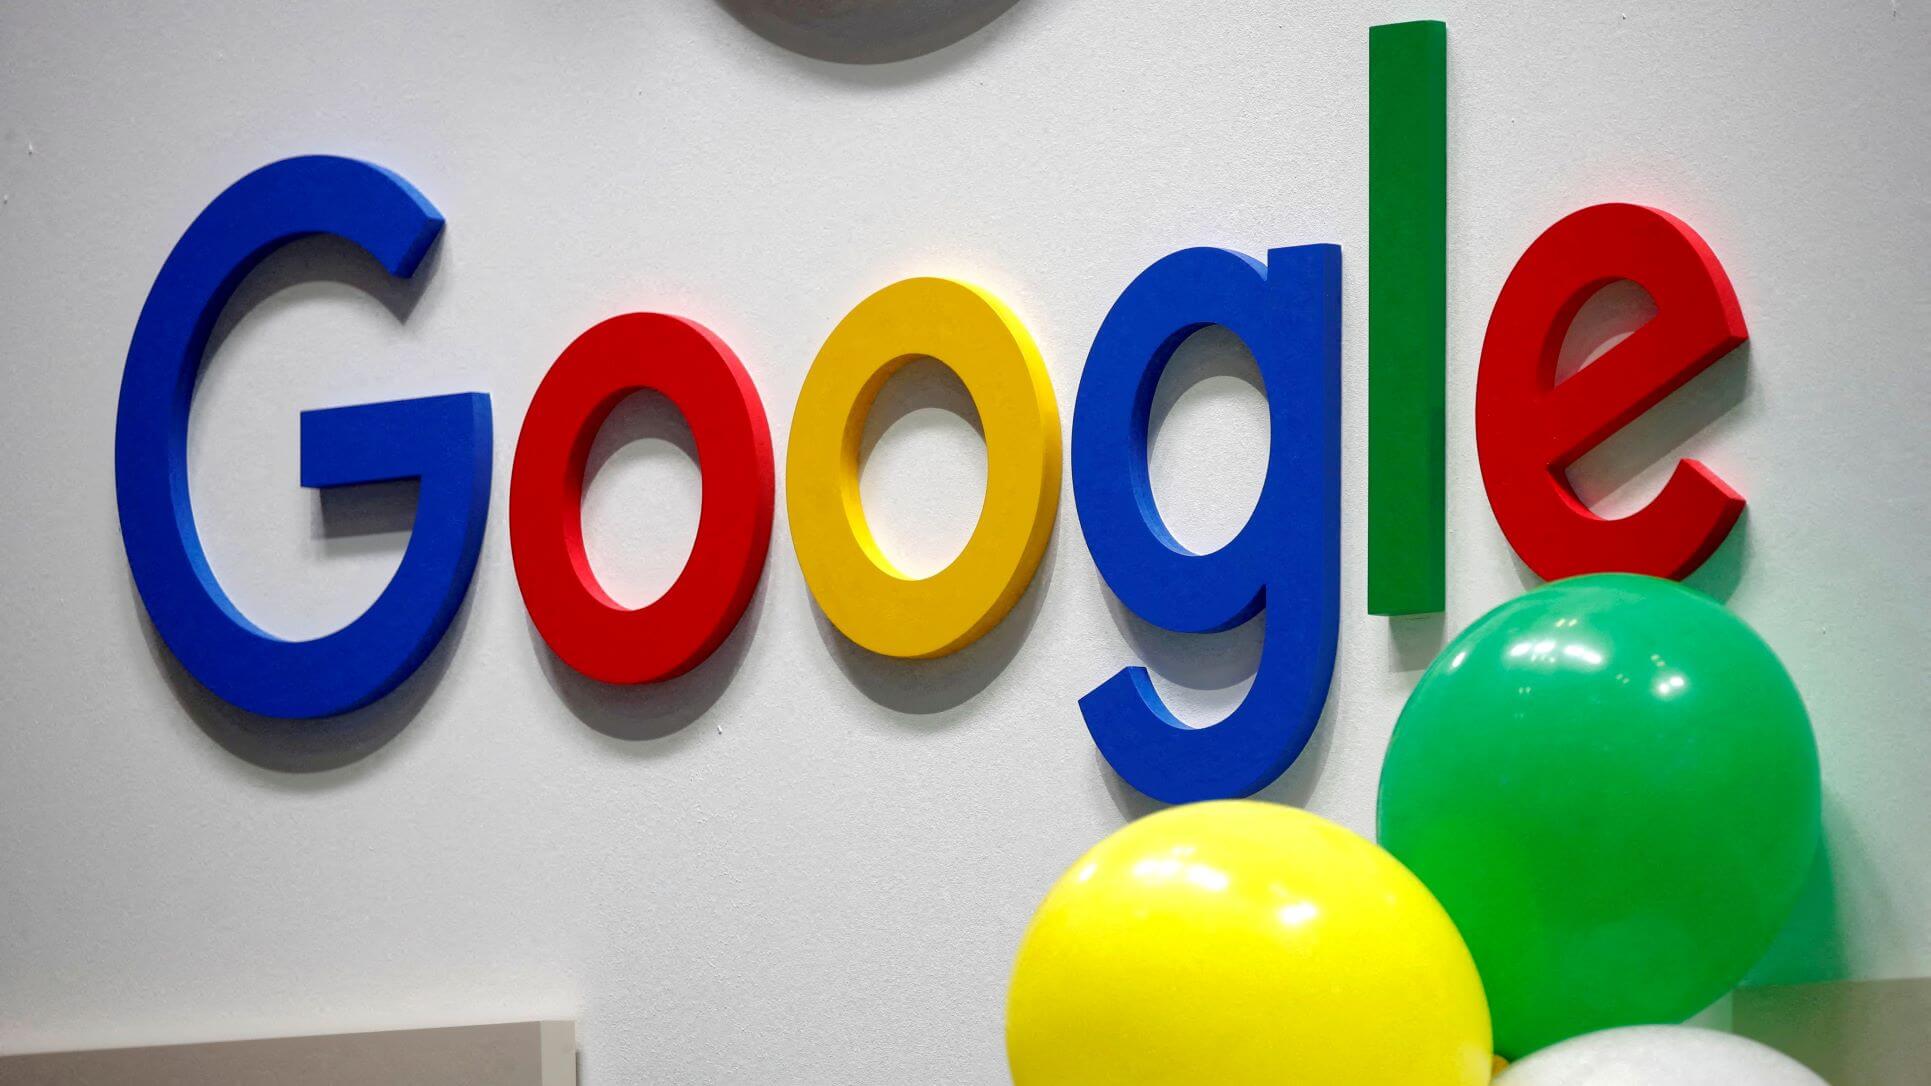 Google To Pay $90 Million To Settle Legal Fight With App Developers